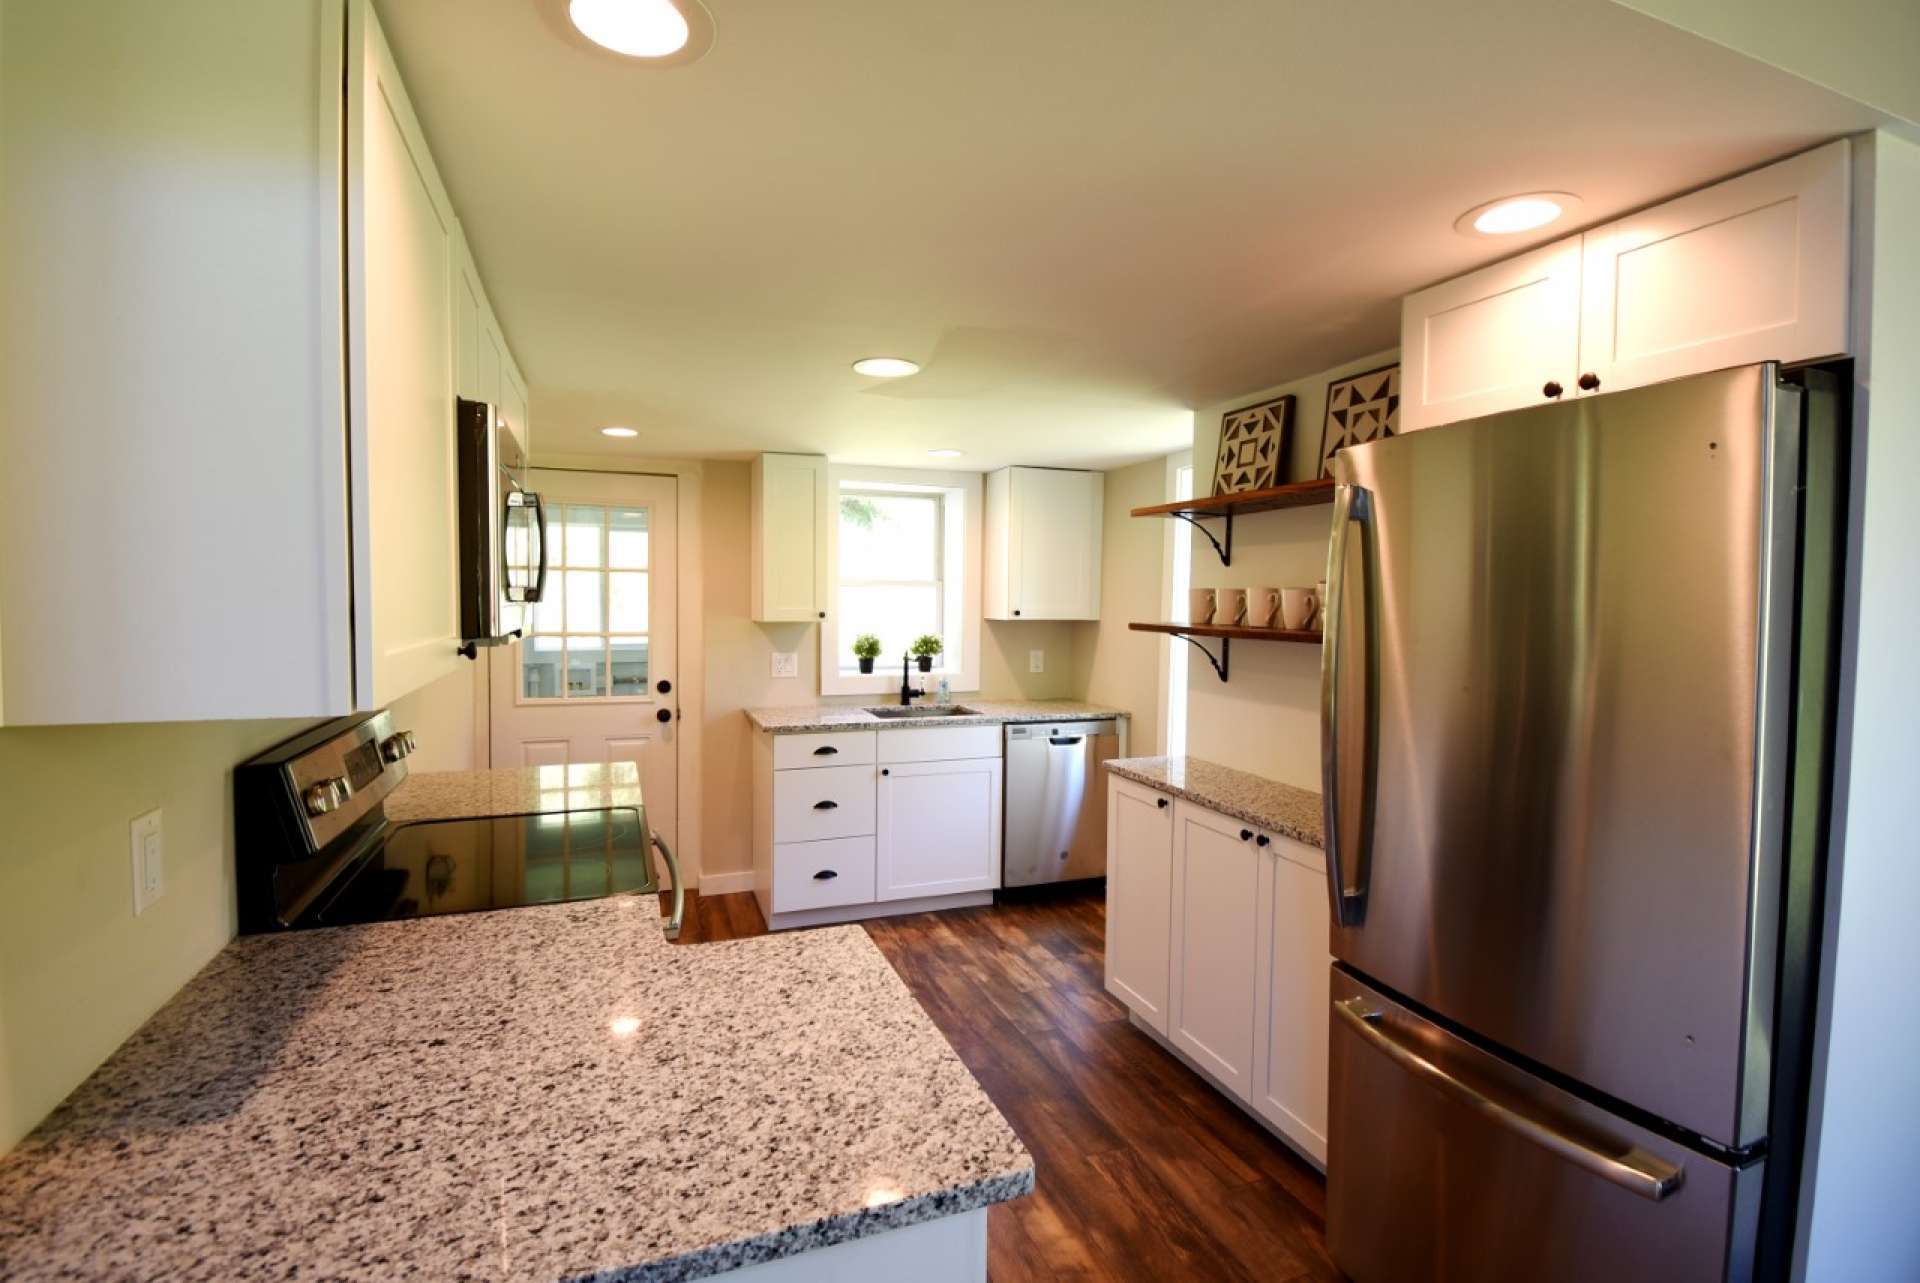 The kitchen features all new cabinets, granite counter tops, stainless appliances and under cabinet lighting.